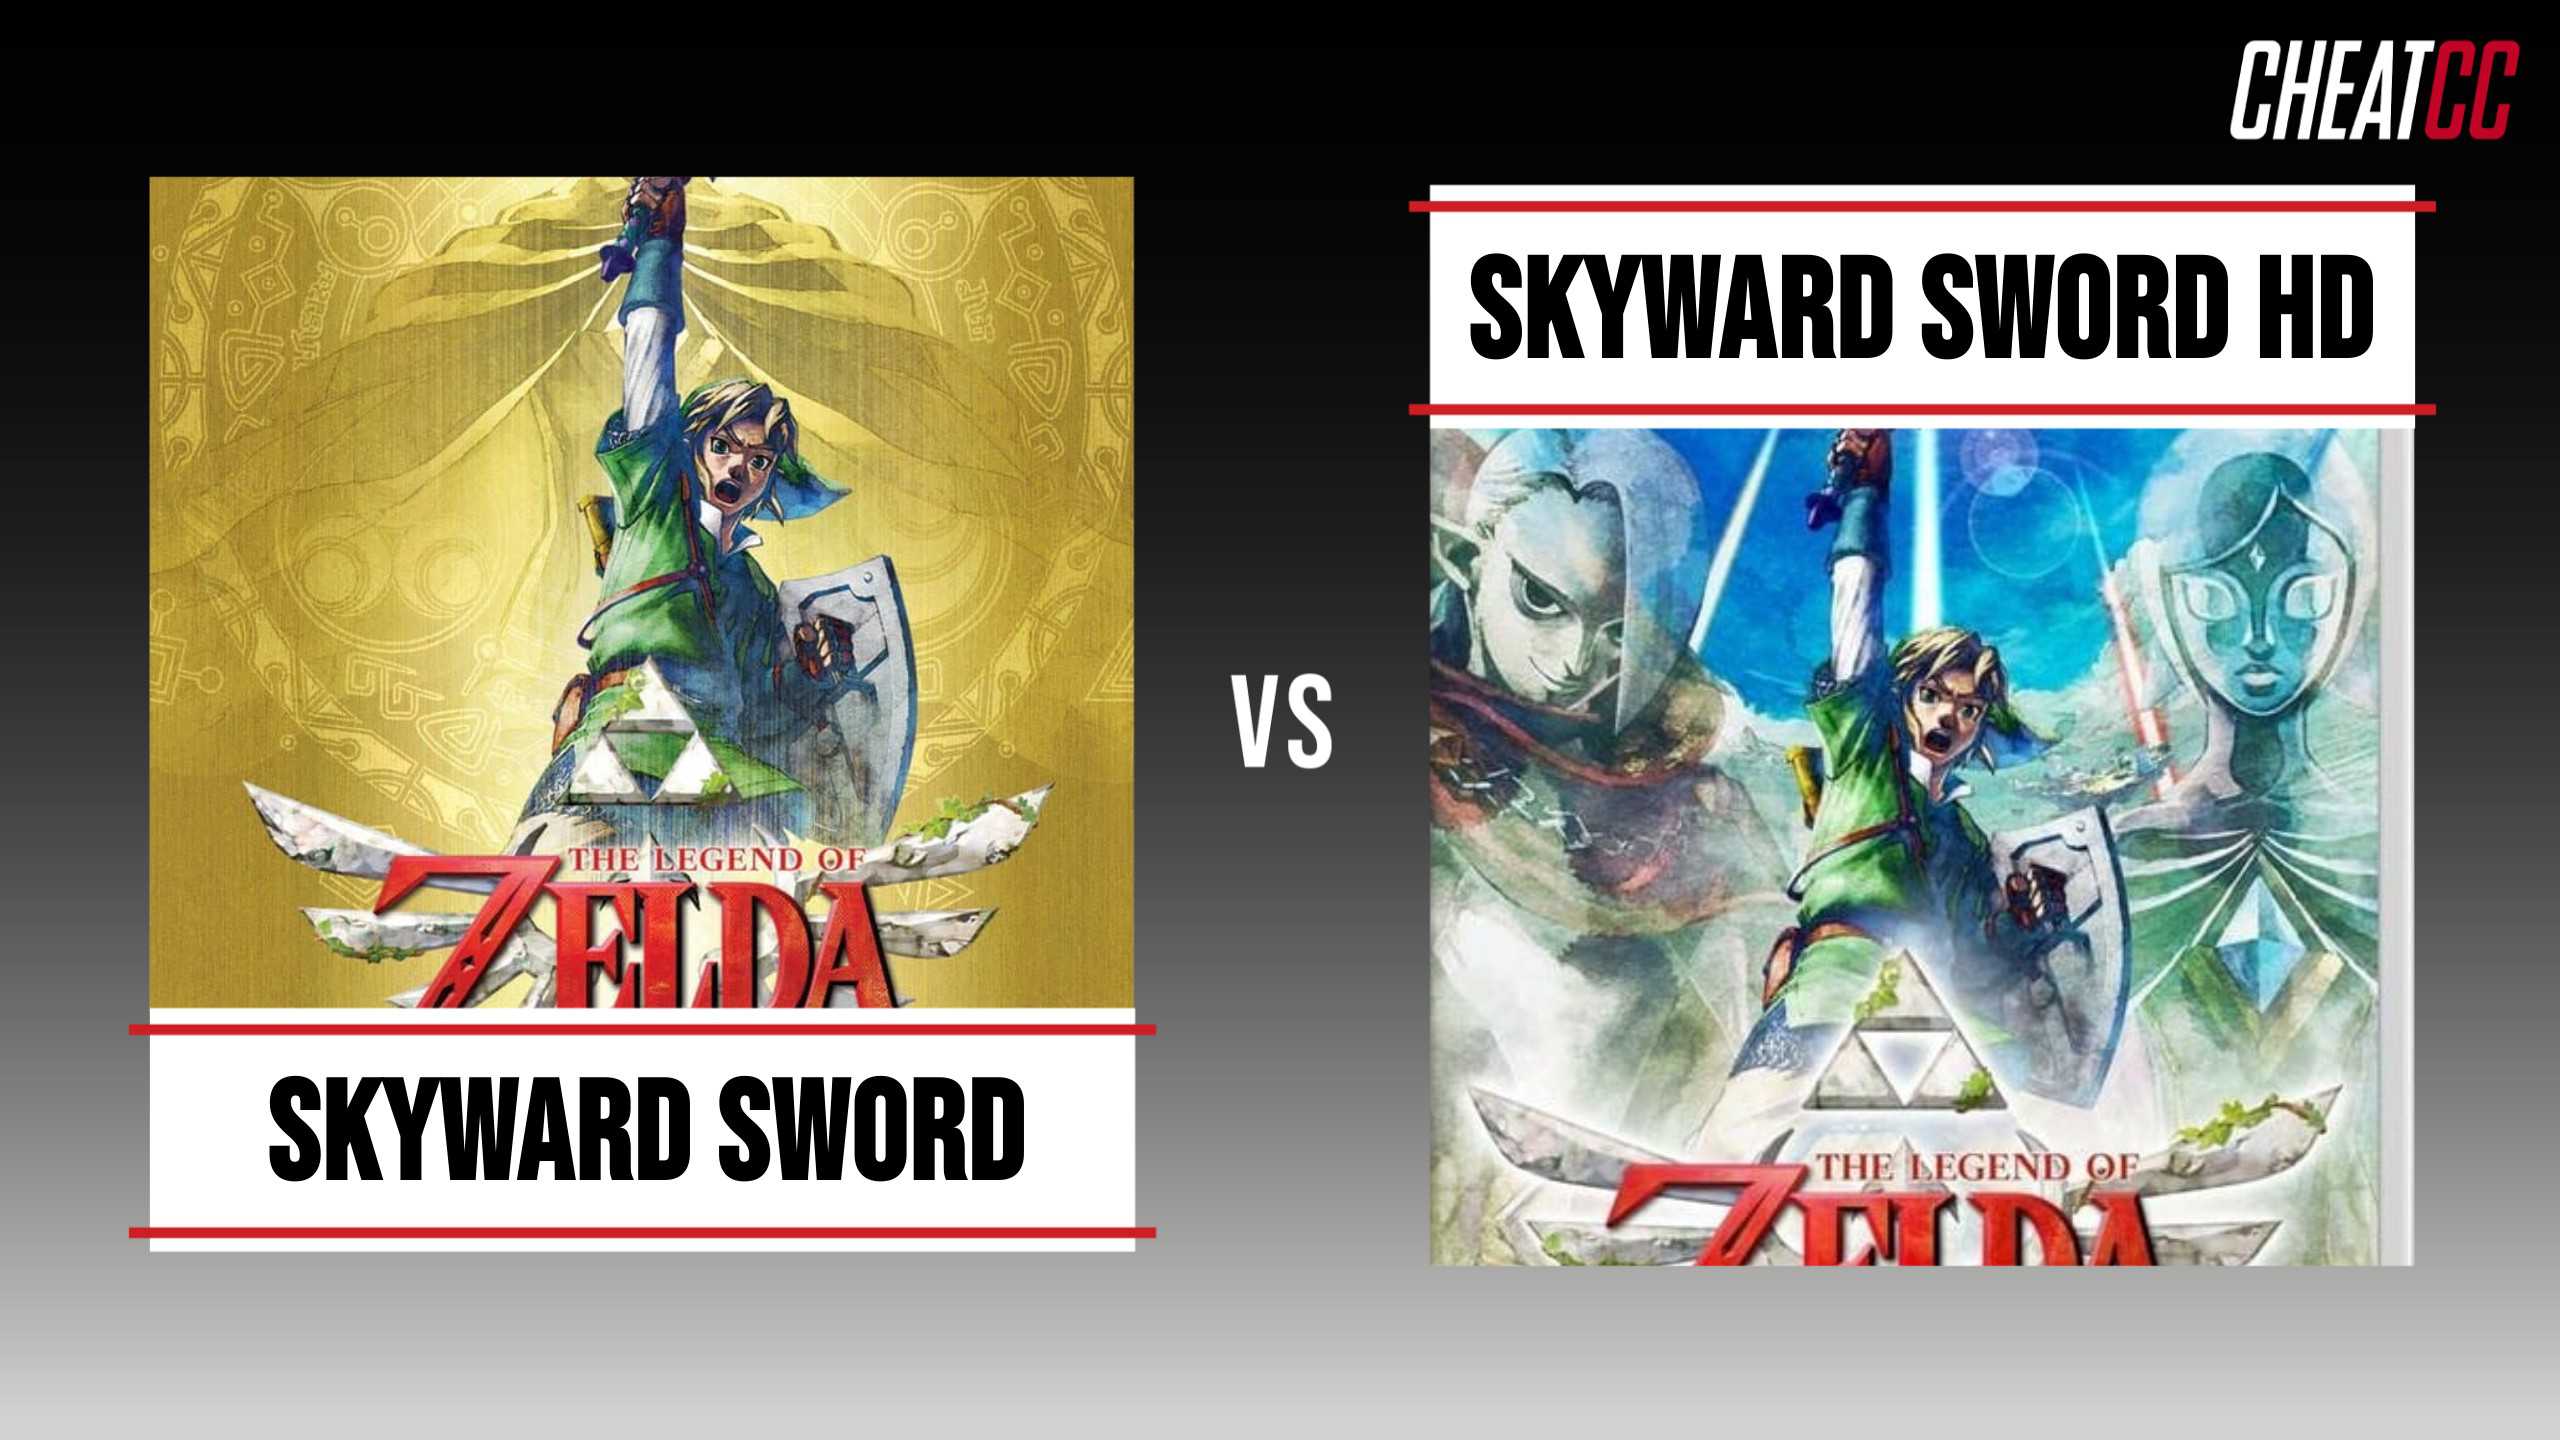 I Remade that Classic Switch Vs Wii U Image : r/NintendoSwitch